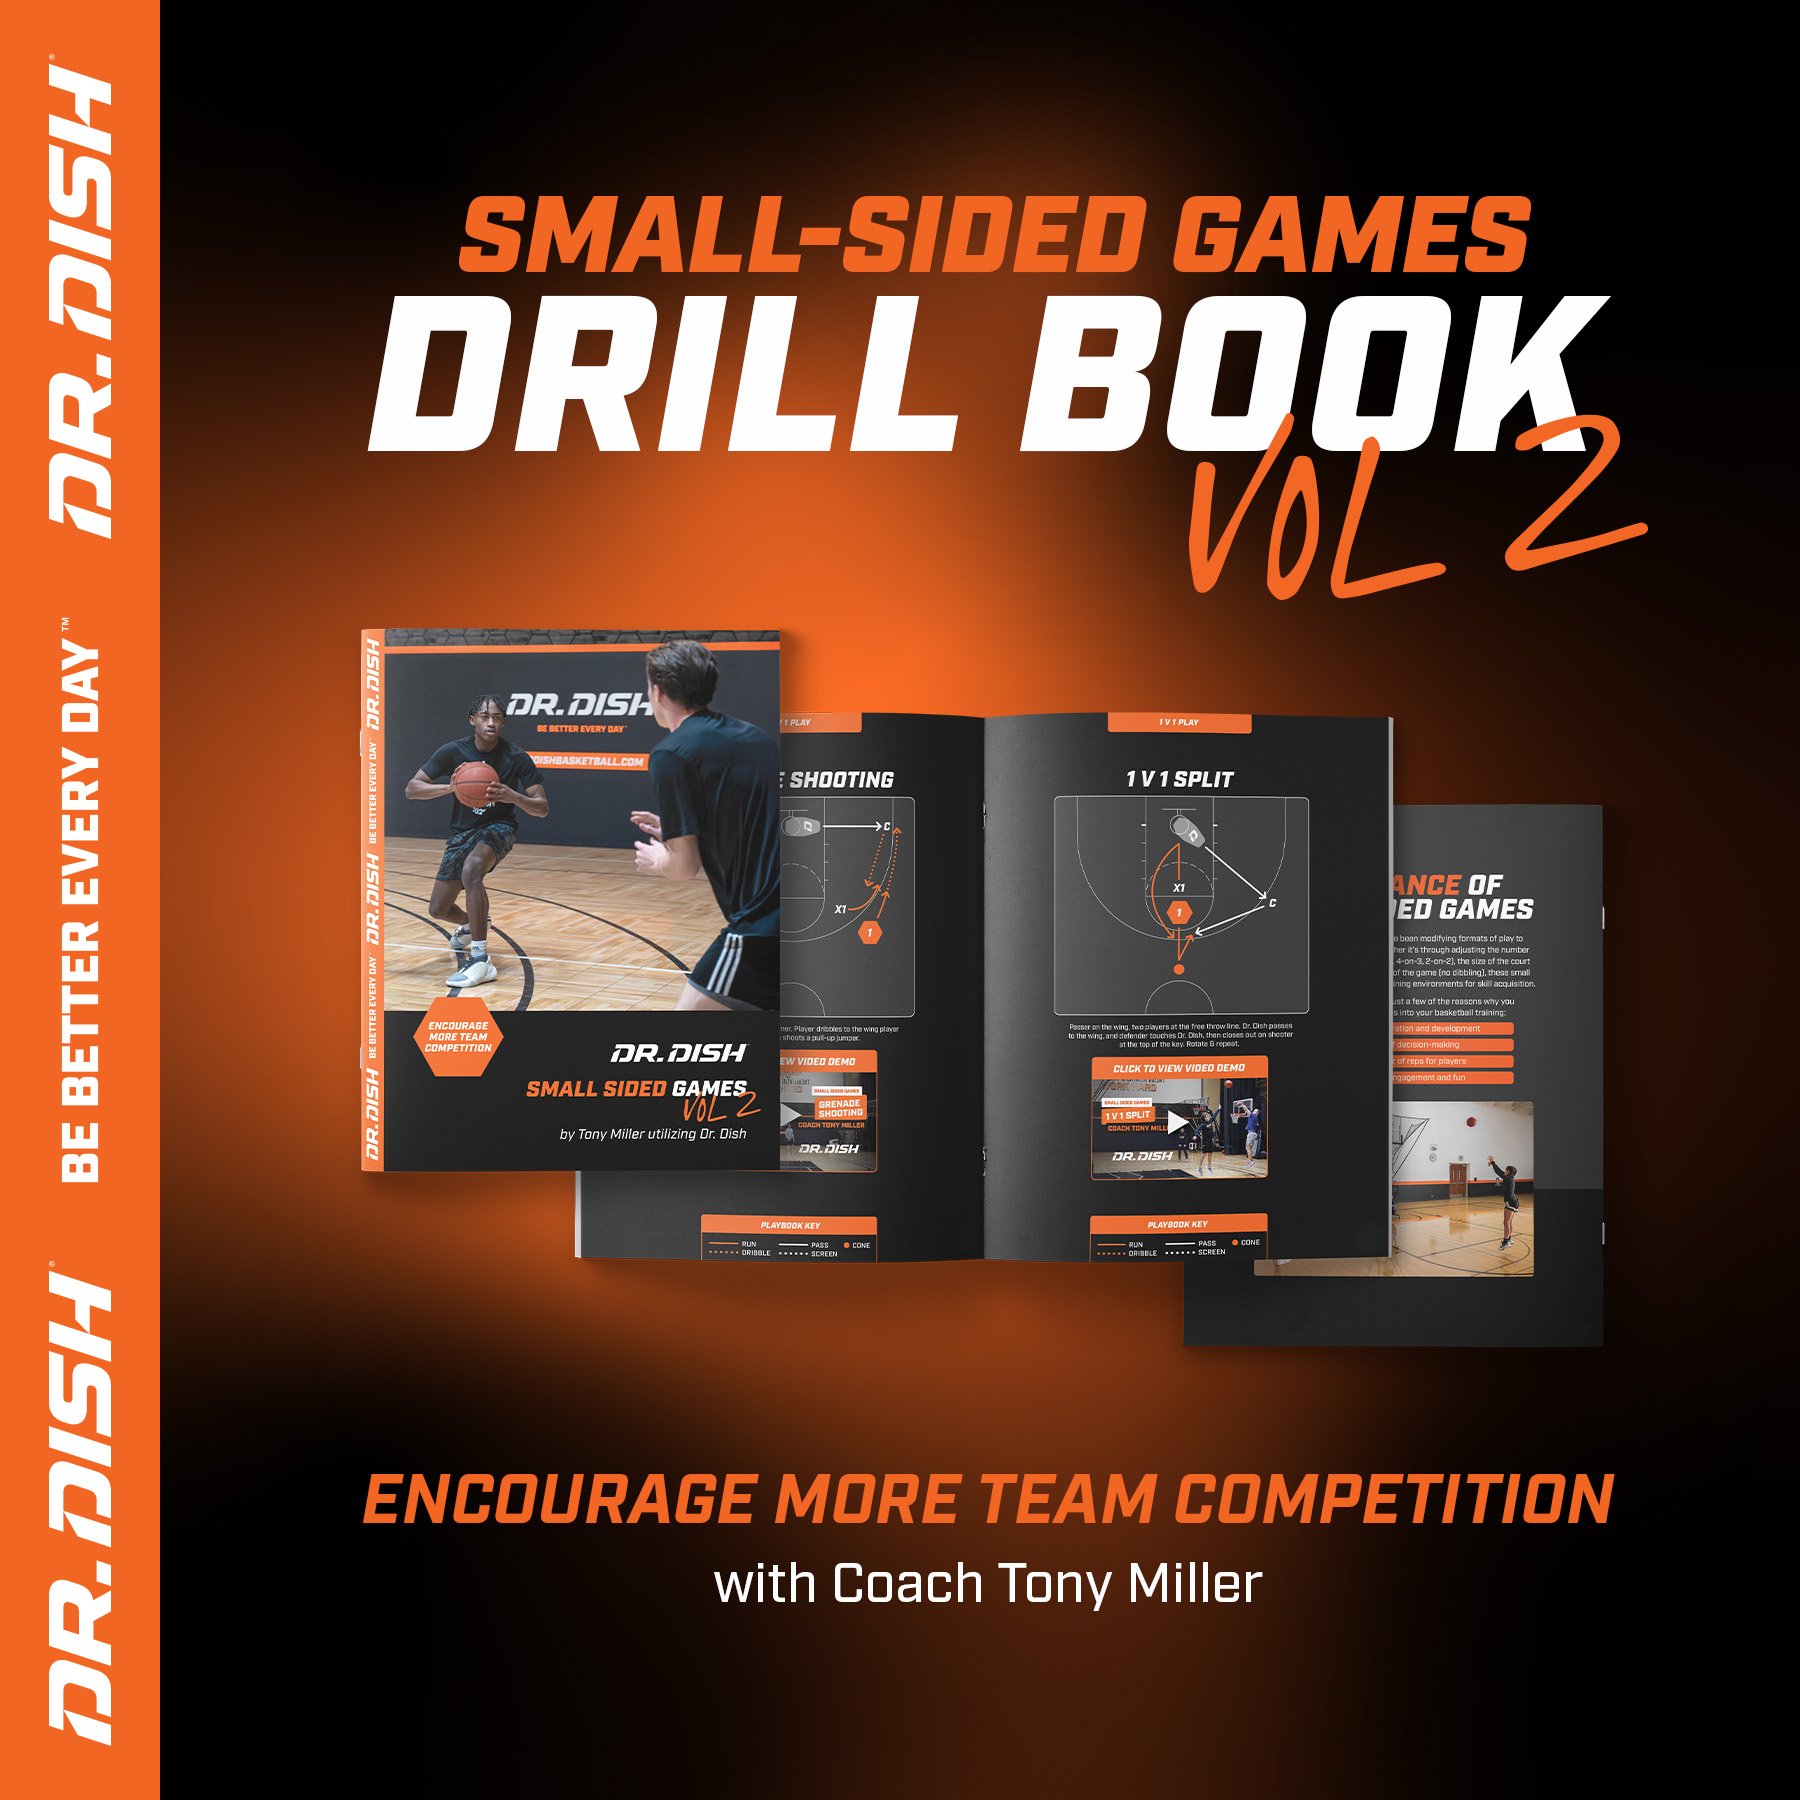 Download 11 FREE Small Sided Basketball Games